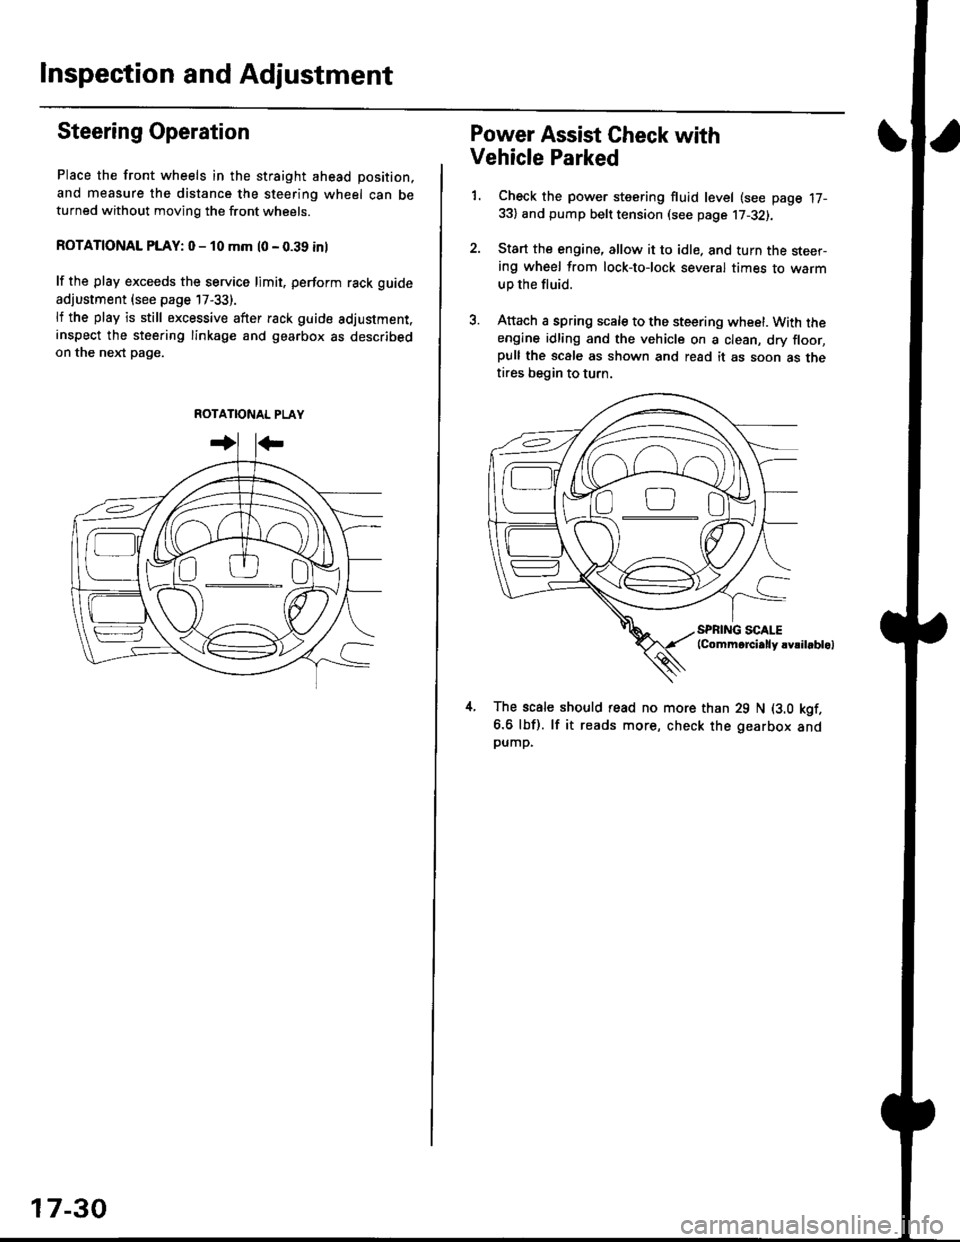 HONDA CIVIC 1997 6.G Owners Manual Inspection and Adjustment
Steering Operation
Place the front wheels in the straight ahead position,
and measure the distance the steering wheel can beturned without moving the front wheels.
ROTATIONAL